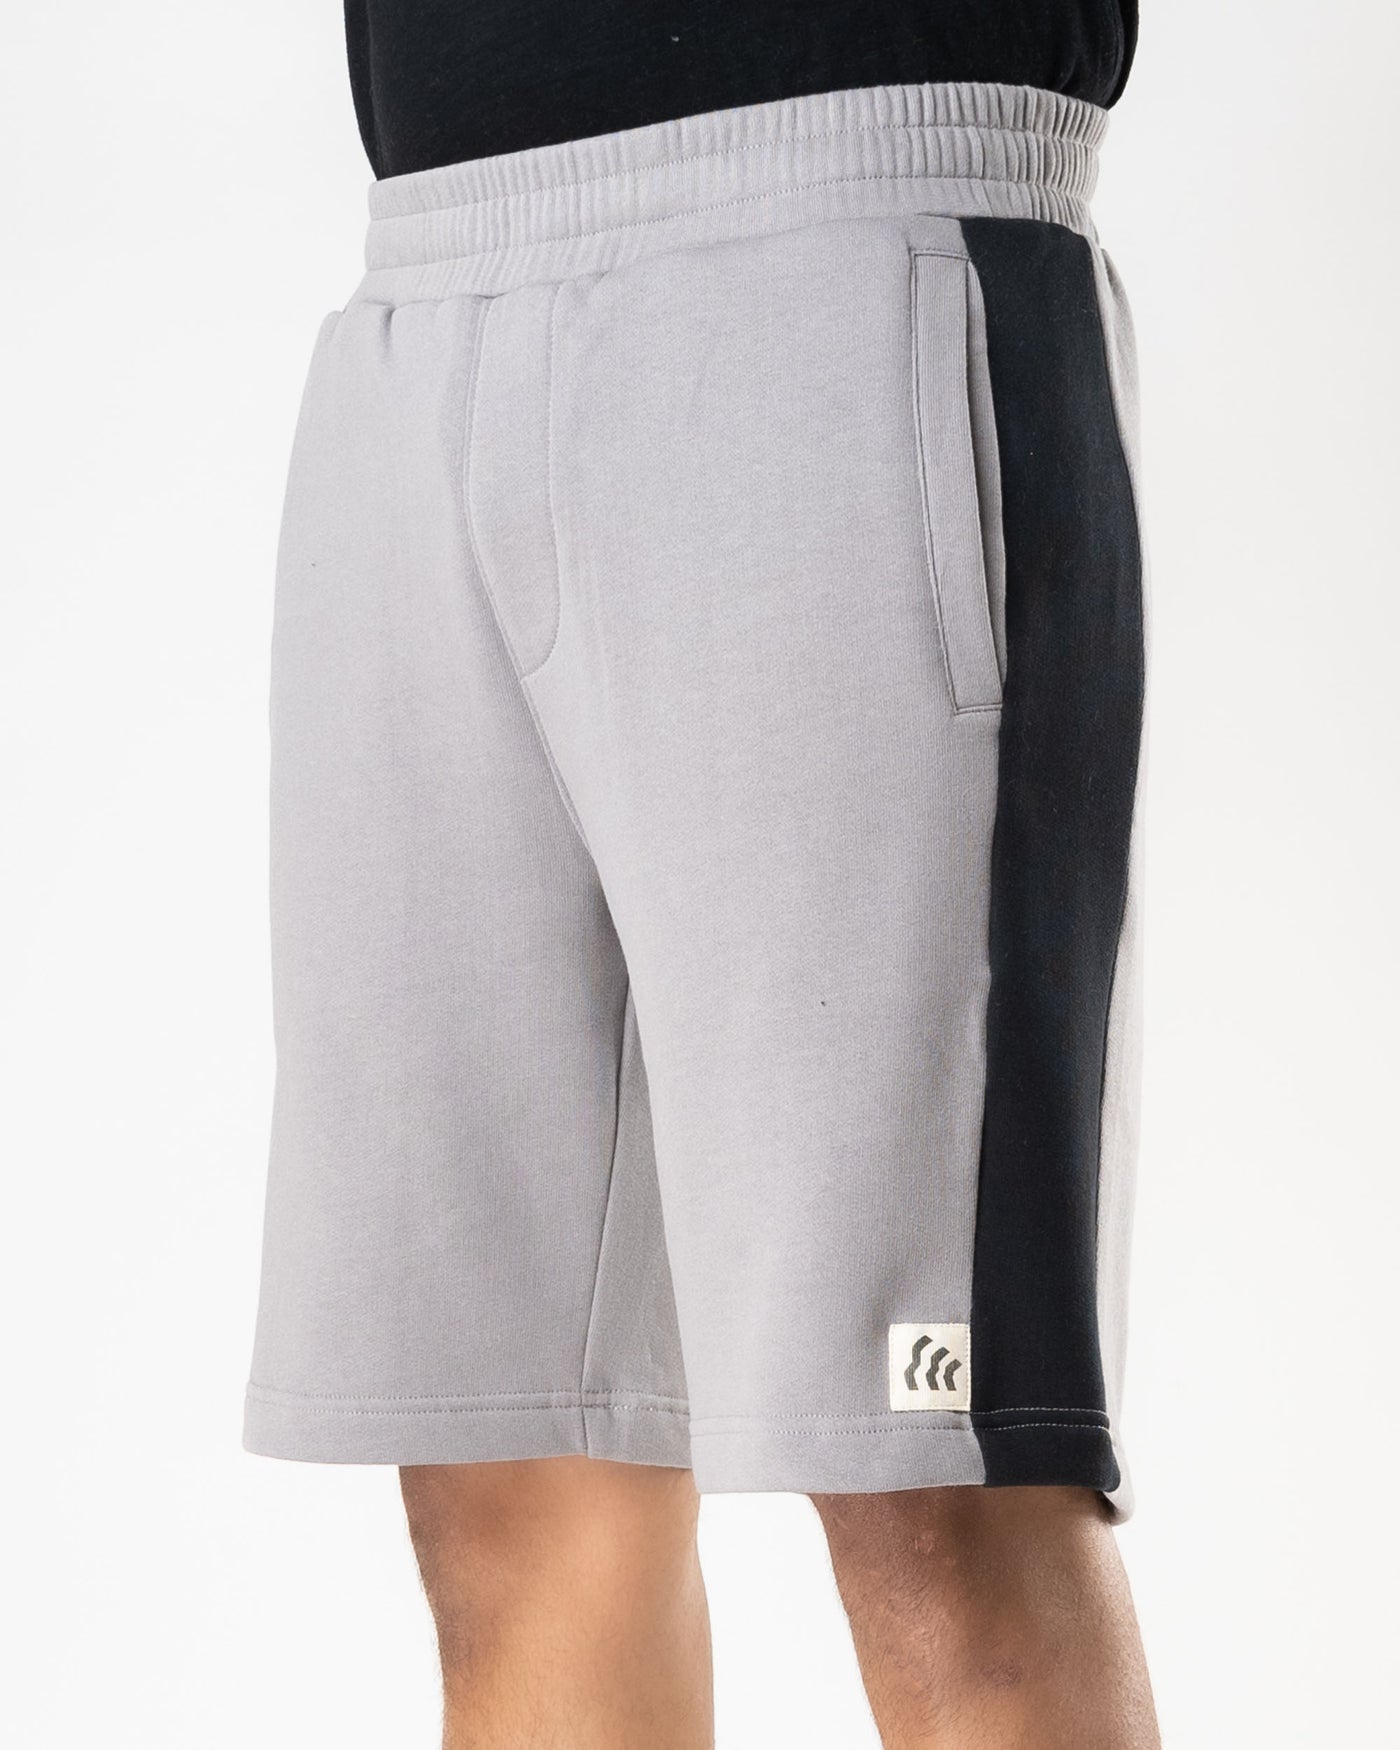 The All Weather Organic Cotton Casual Shorts